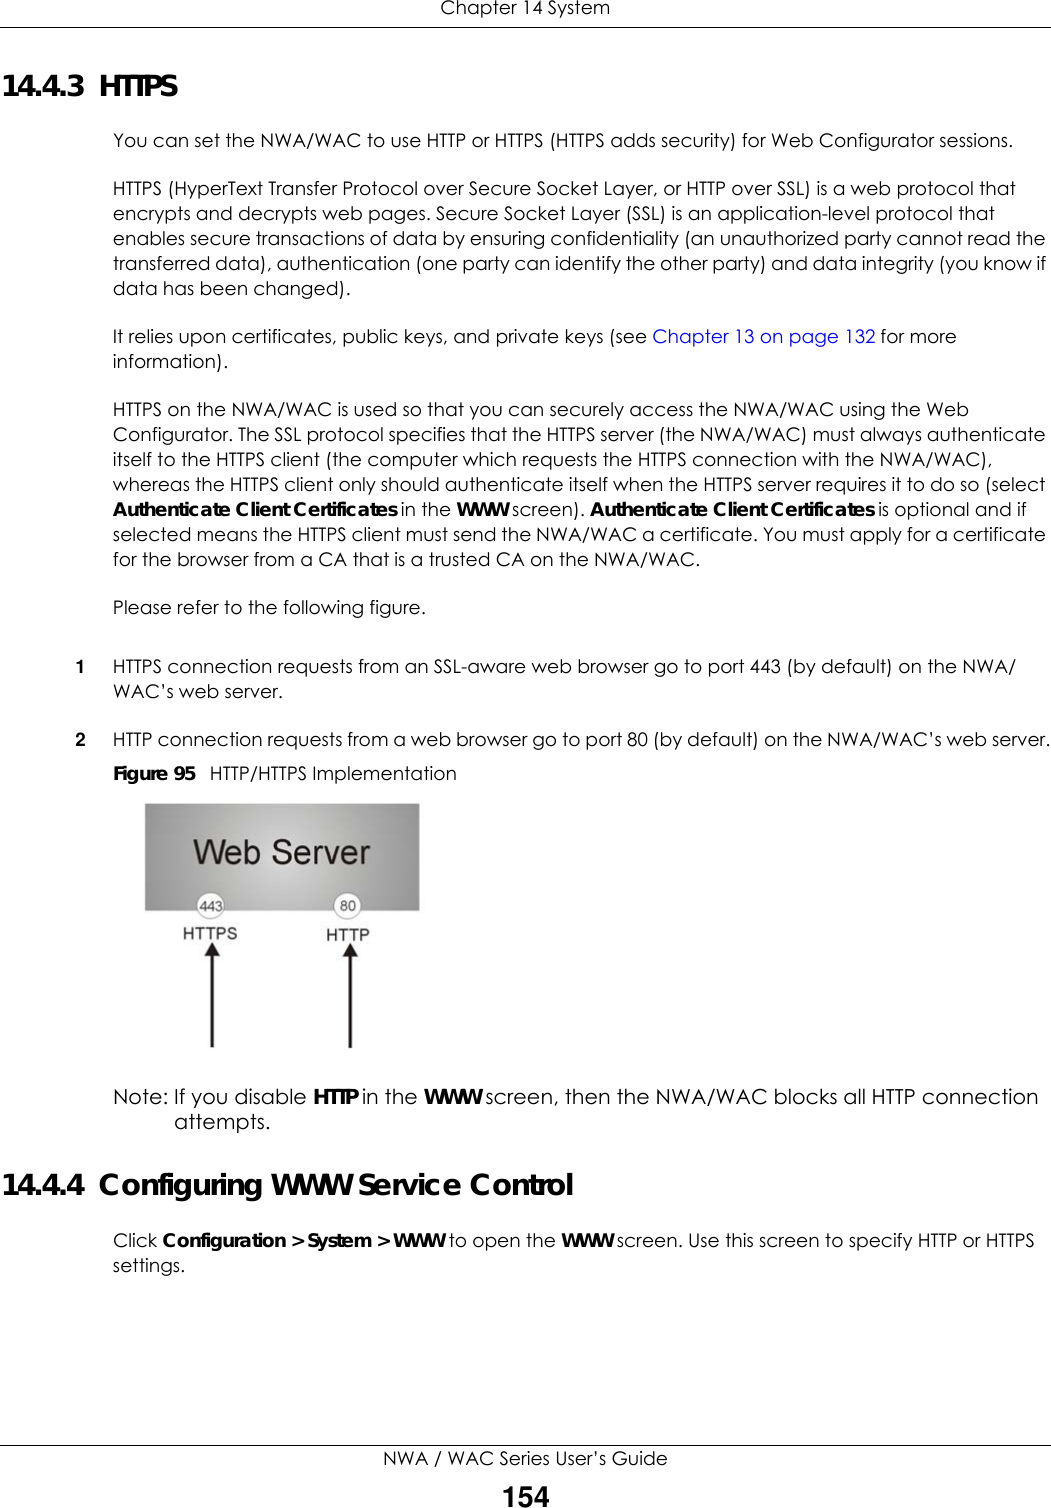 Chapter 14 SystemNWA / WAC Series User’s Guide15414.4.3  HTTPSYou can set the NWA/WAC to use HTTP or HTTPS (HTTPS adds security) for Web Configurator sessions. HTTPS (HyperText Transfer Protocol over Secure Socket Layer, or HTTP over SSL) is a web protocol that encrypts and decrypts web pages. Secure Socket Layer (SSL) is an application-level protocol that enables secure transactions of data by ensuring confidentiality (an unauthorized party cannot read the transferred data), authentication (one party can identify the other party) and data integrity (you know if data has been changed). It relies upon certificates, public keys, and private keys (see Chapter 13 on page 132 for more information).HTTPS on the NWA/WAC is used so that you can securely access the NWA/WAC using the Web Configurator. The SSL protocol specifies that the HTTPS server (the NWA/WAC) must always authenticate itself to the HTTPS client (the computer which requests the HTTPS connection with the NWA/WAC), whereas the HTTPS client only should authenticate itself when the HTTPS server requires it to do so (select Authenticate Client Certificates in the WWW screen). Authenticate Client Certificates is optional and if selected means the HTTPS client must send the NWA/WAC a certificate. You must apply for a certificate for the browser from a CA that is a trusted CA on the NWA/WAC.Please refer to the following figure.1HTTPS connection requests from an SSL-aware web browser go to port 443 (by default) on the NWA/WAC’s web server.2HTTP connection requests from a web browser go to port 80 (by default) on the NWA/WAC’s web server.Figure 95   HTTP/HTTPS ImplementationNote: If you disable HTTP in the WWW screen, then the NWA/WAC blocks all HTTP connection attempts.14.4.4  Configuring WWW Service ControlClick Configuration &gt; System &gt; WWW to open the WWW screen. Use this screen to specify HTTP or HTTPS settings. 